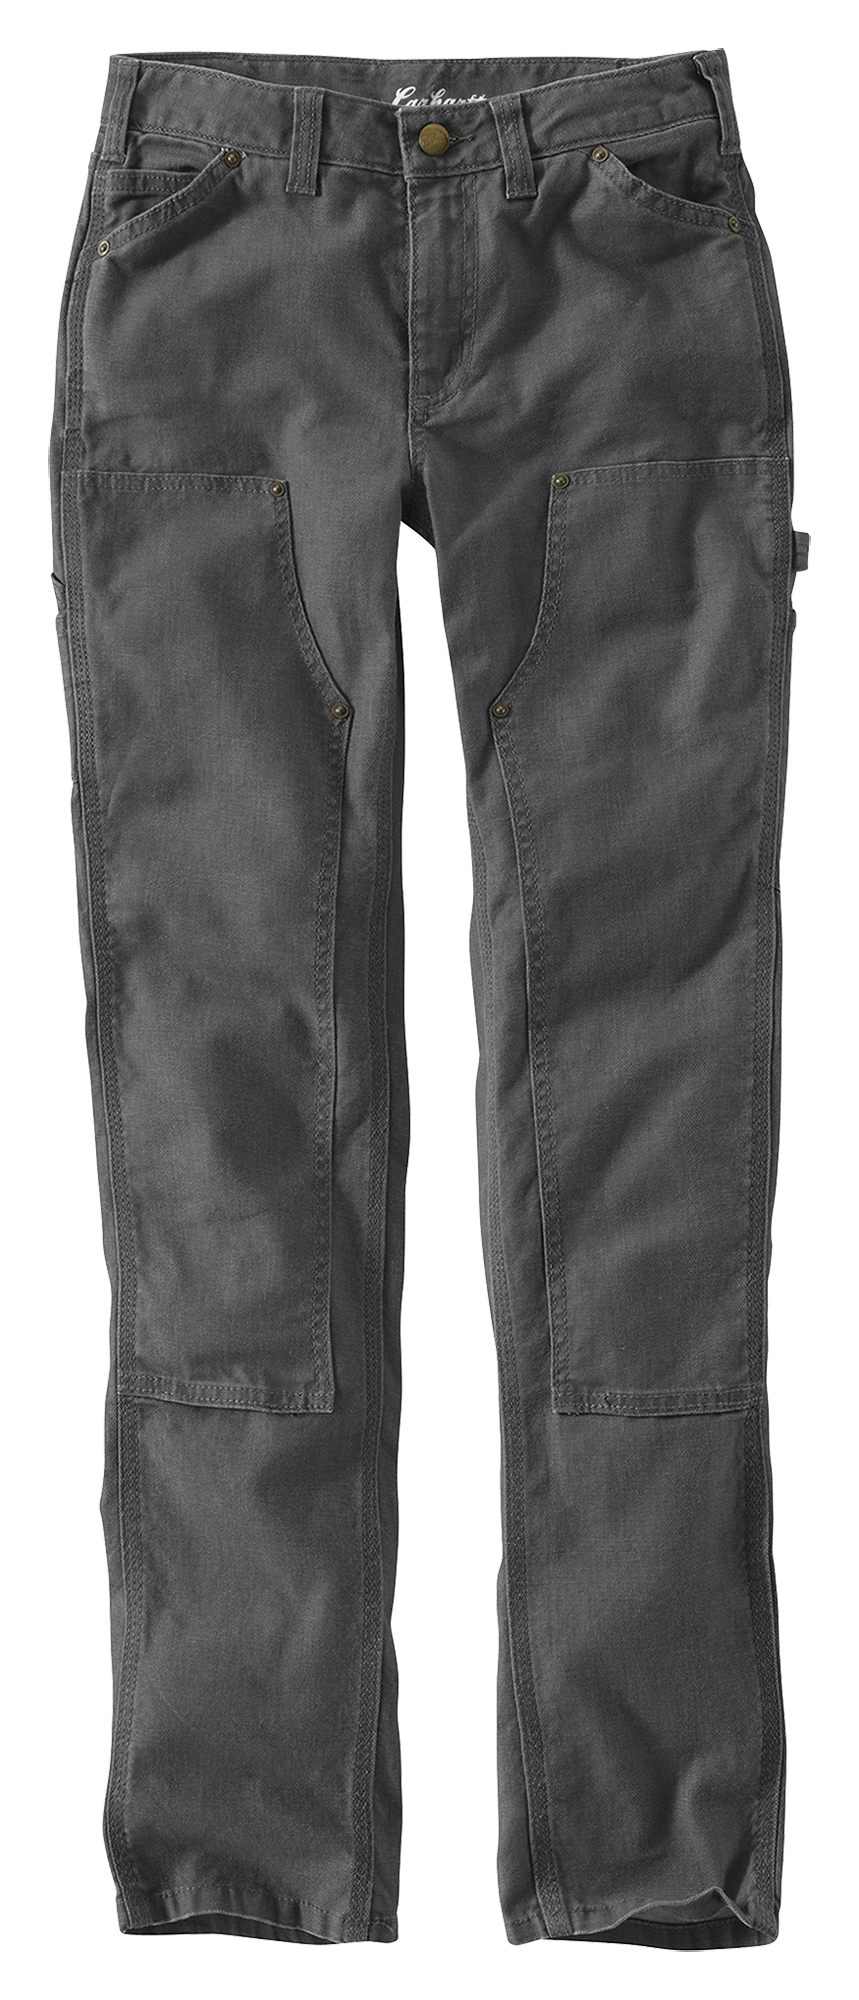 Carhartt Series 1889 Slim Double Front Dungaree Pants for Ladies | Bass ...